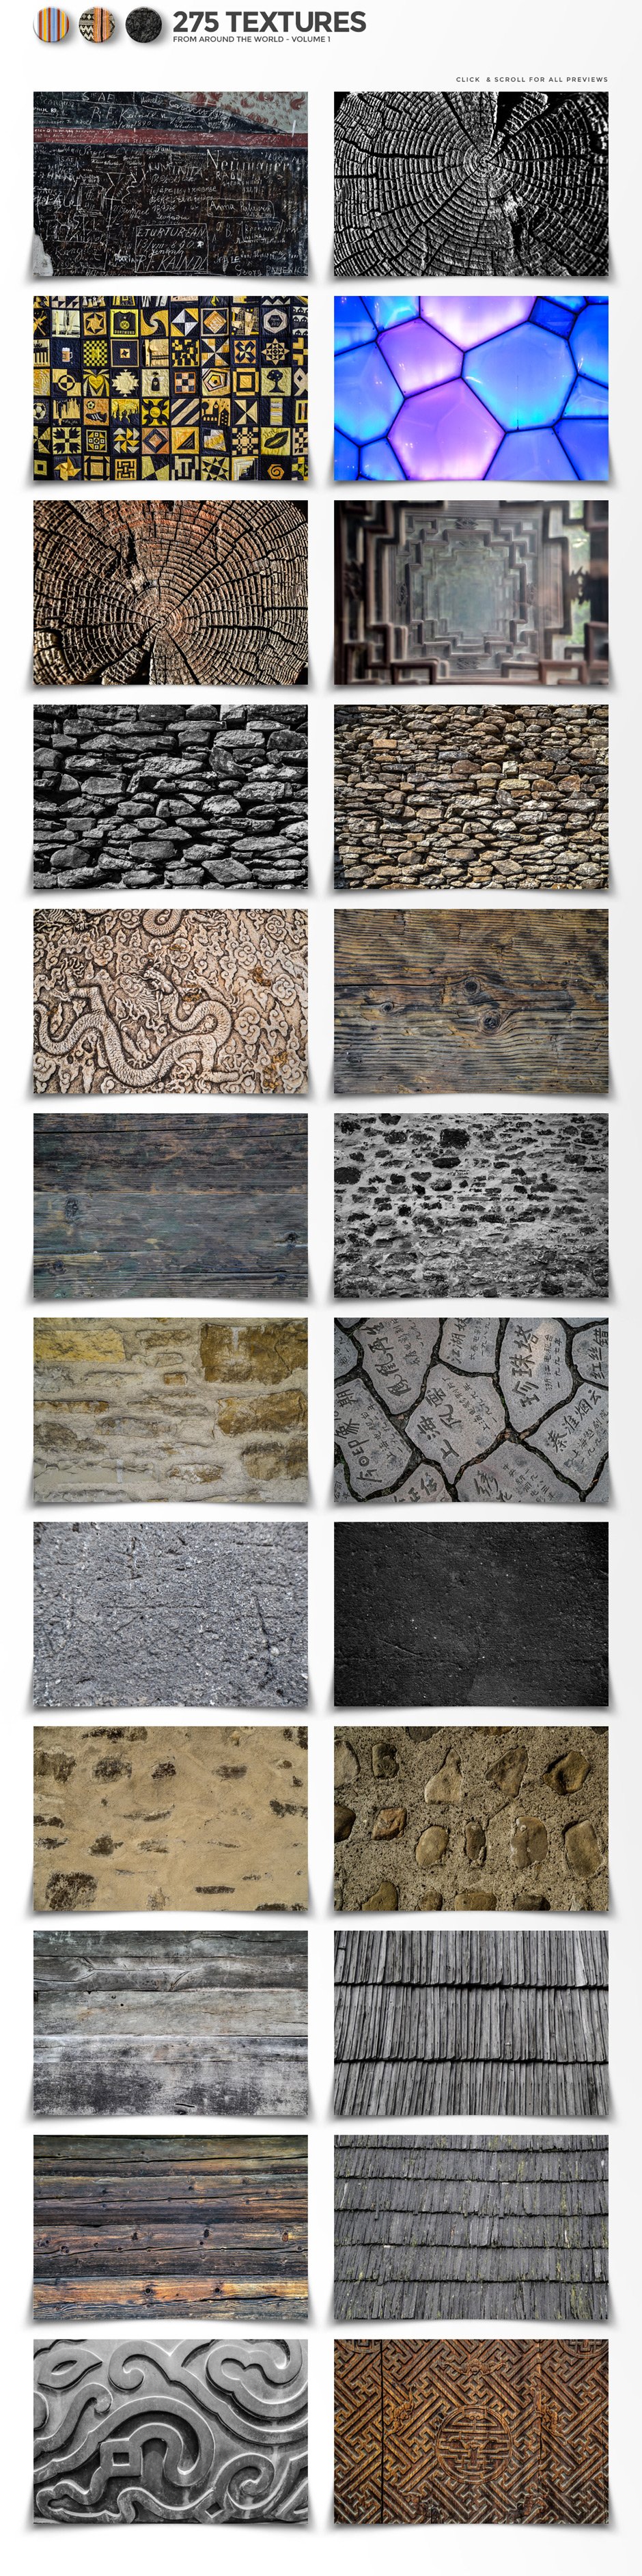 275 World Textures From Around The Globe